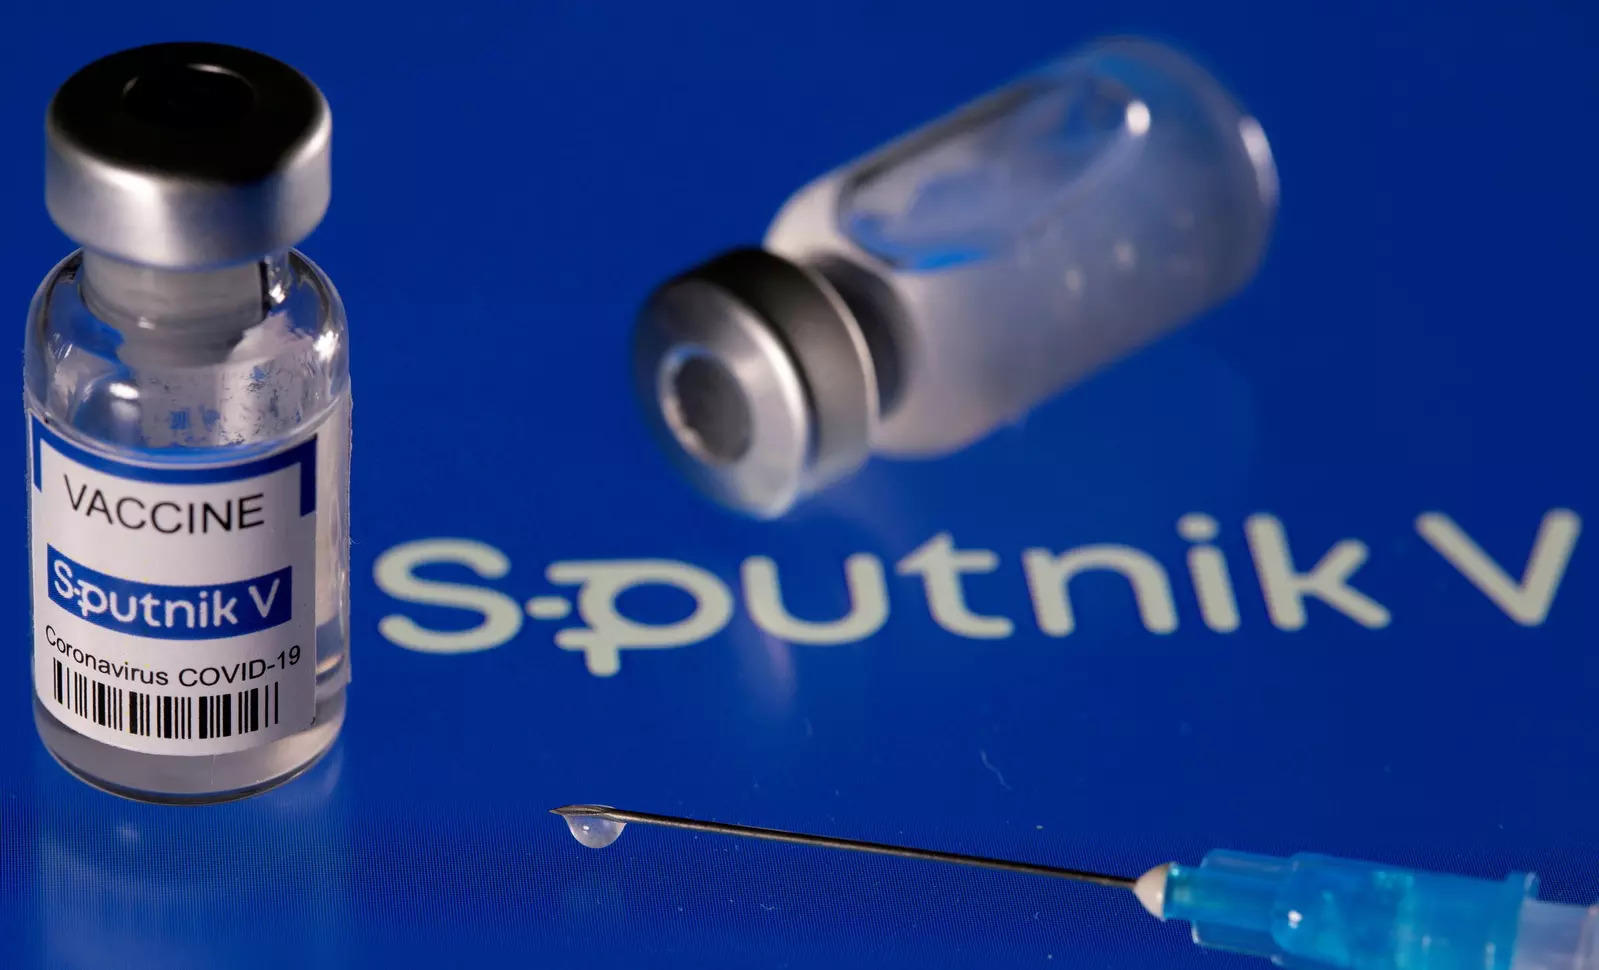 Covishield, Covaxin, Sputnik V Which Vaccine Is Better?